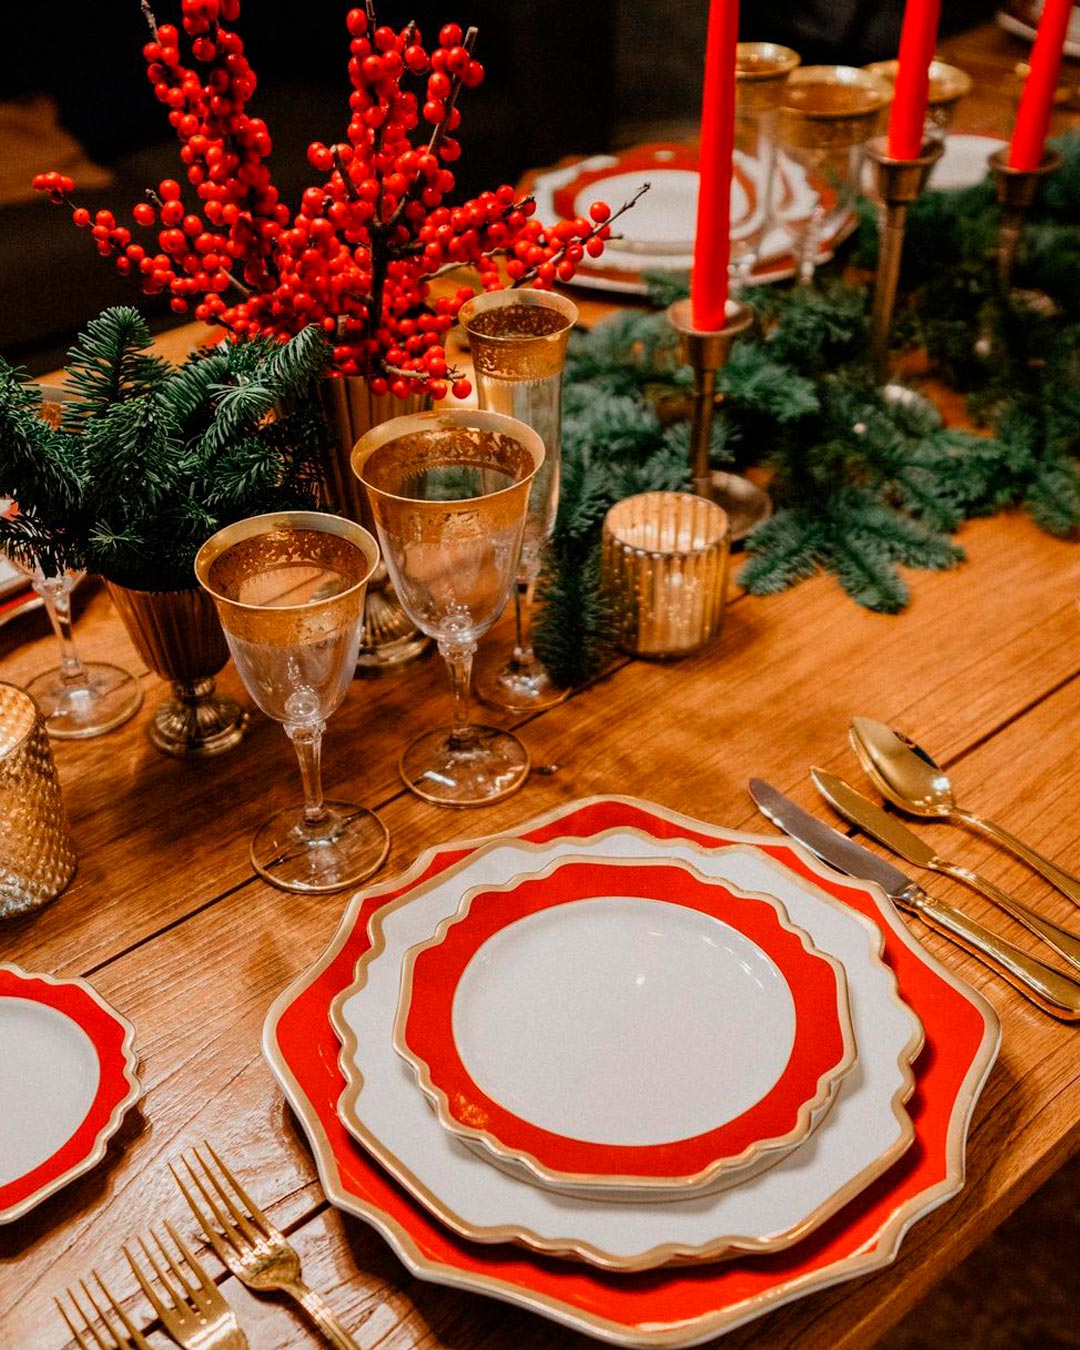 winter wedding decor red white table setting place